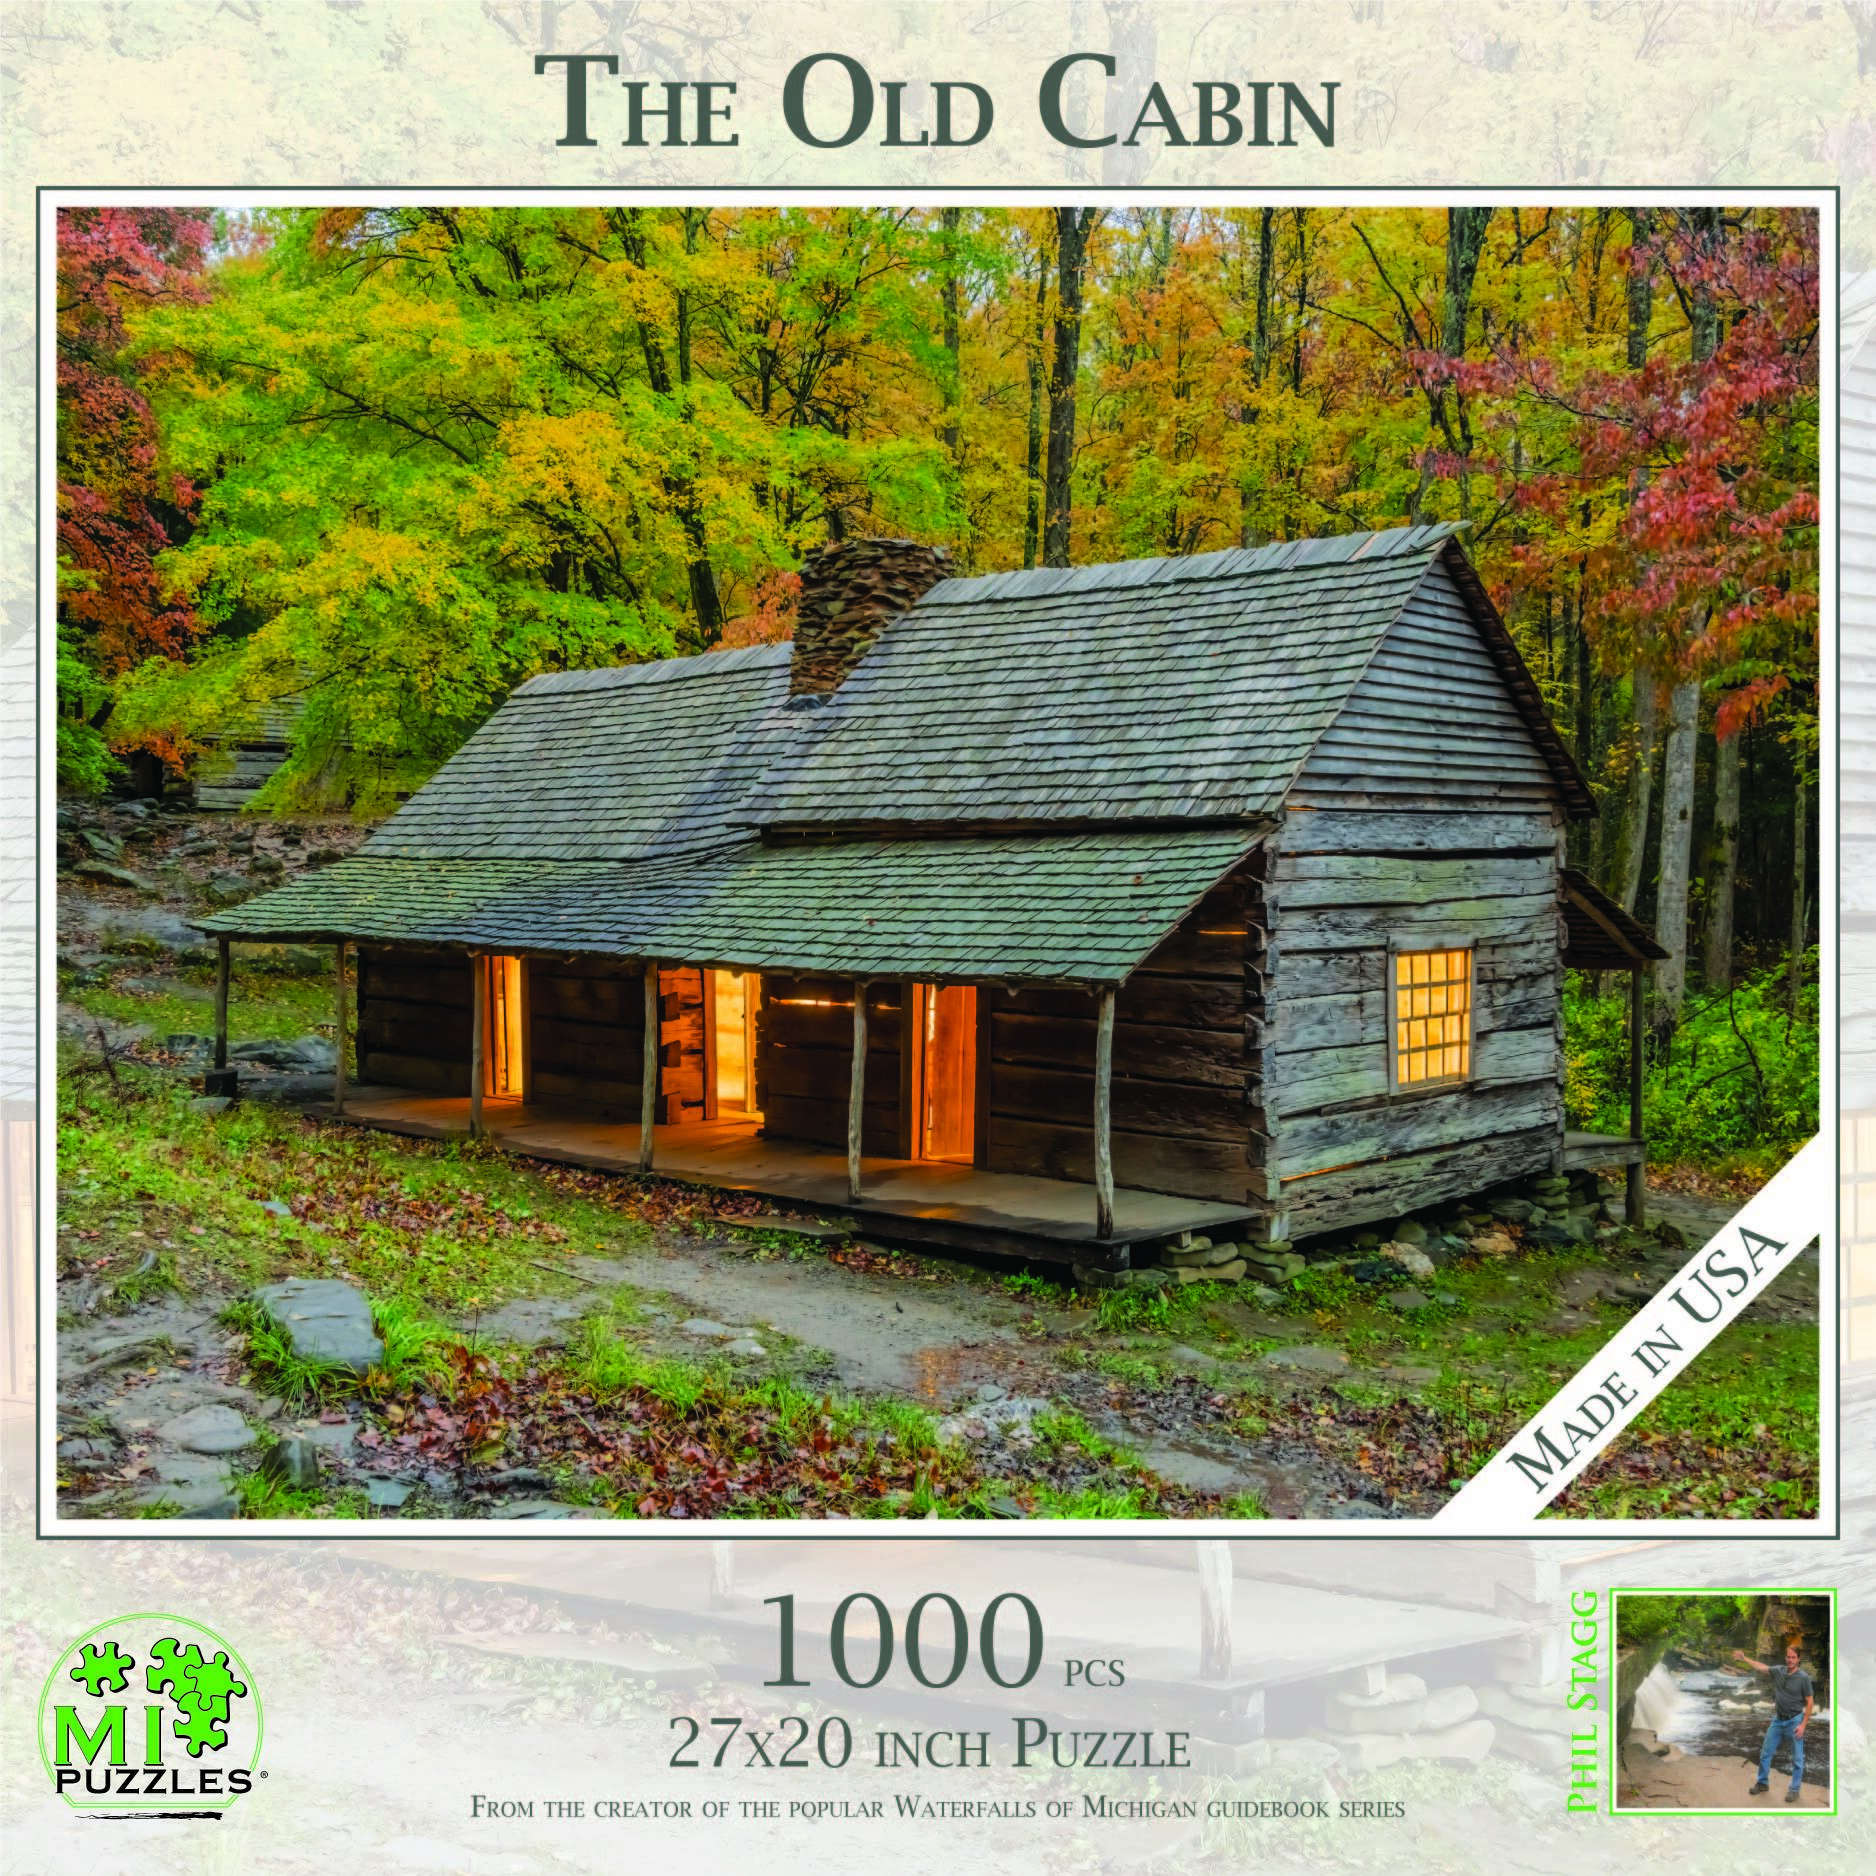 The Old Cabin Puzzle (1000 Pieces)